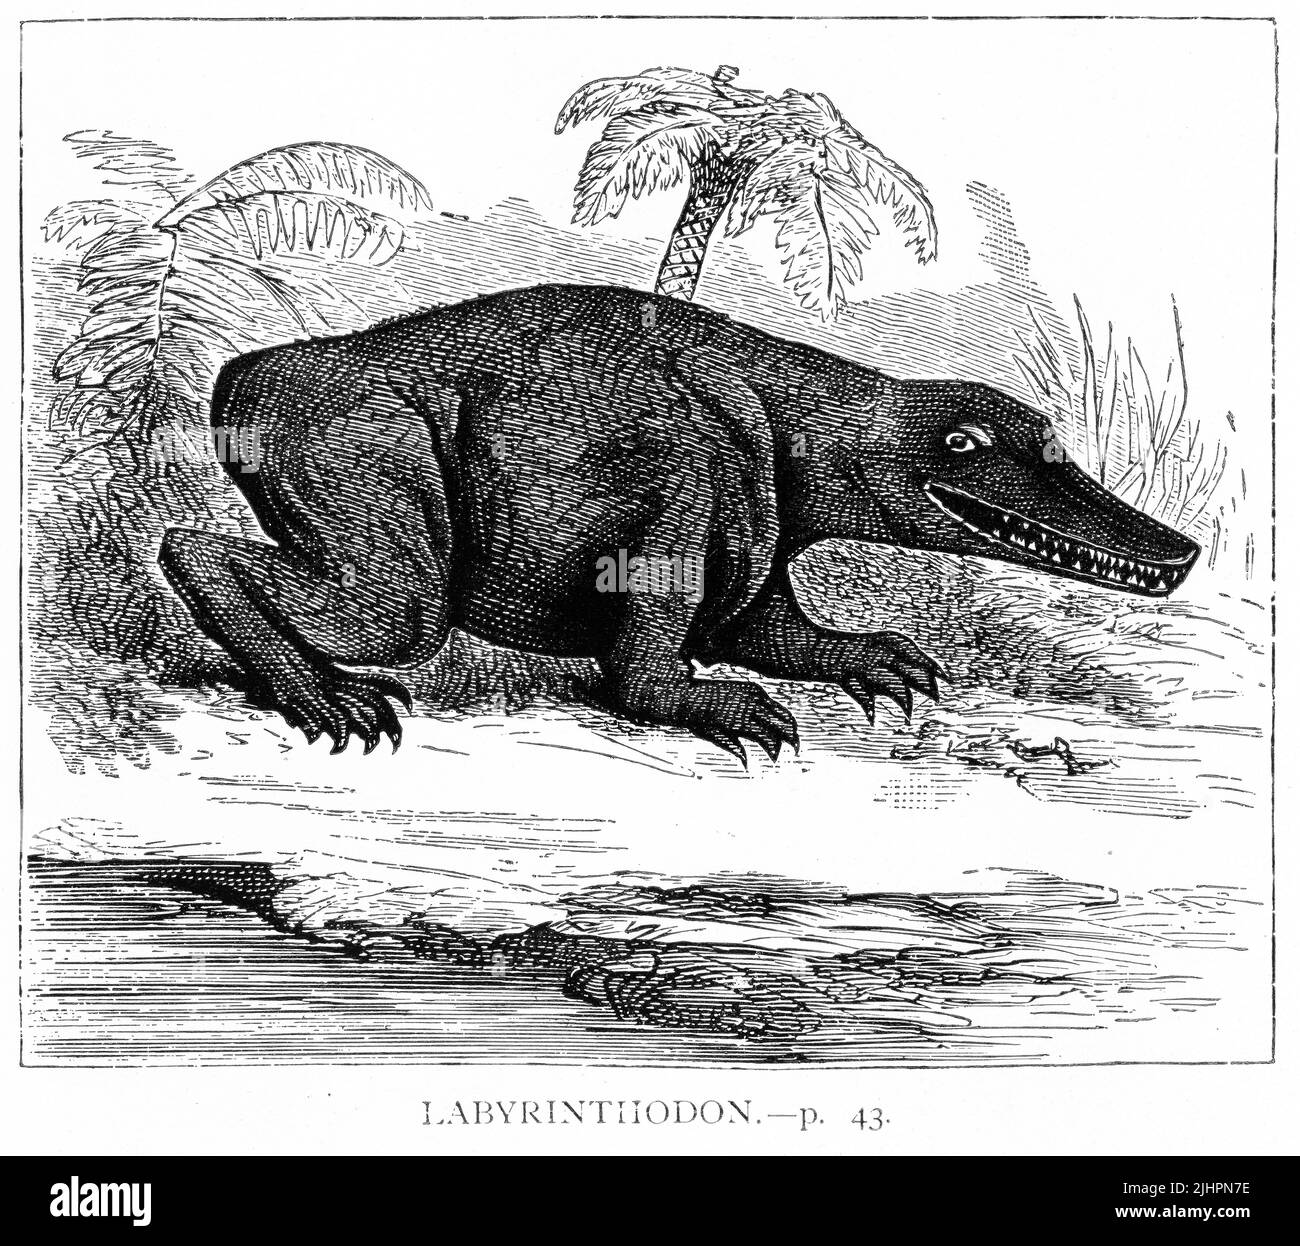 Engraving of a Labyrinthodont, an  extinct predatory amphibians which were major components of ecosystems in the late Paleozoic and early Mesozoic Stock Photo